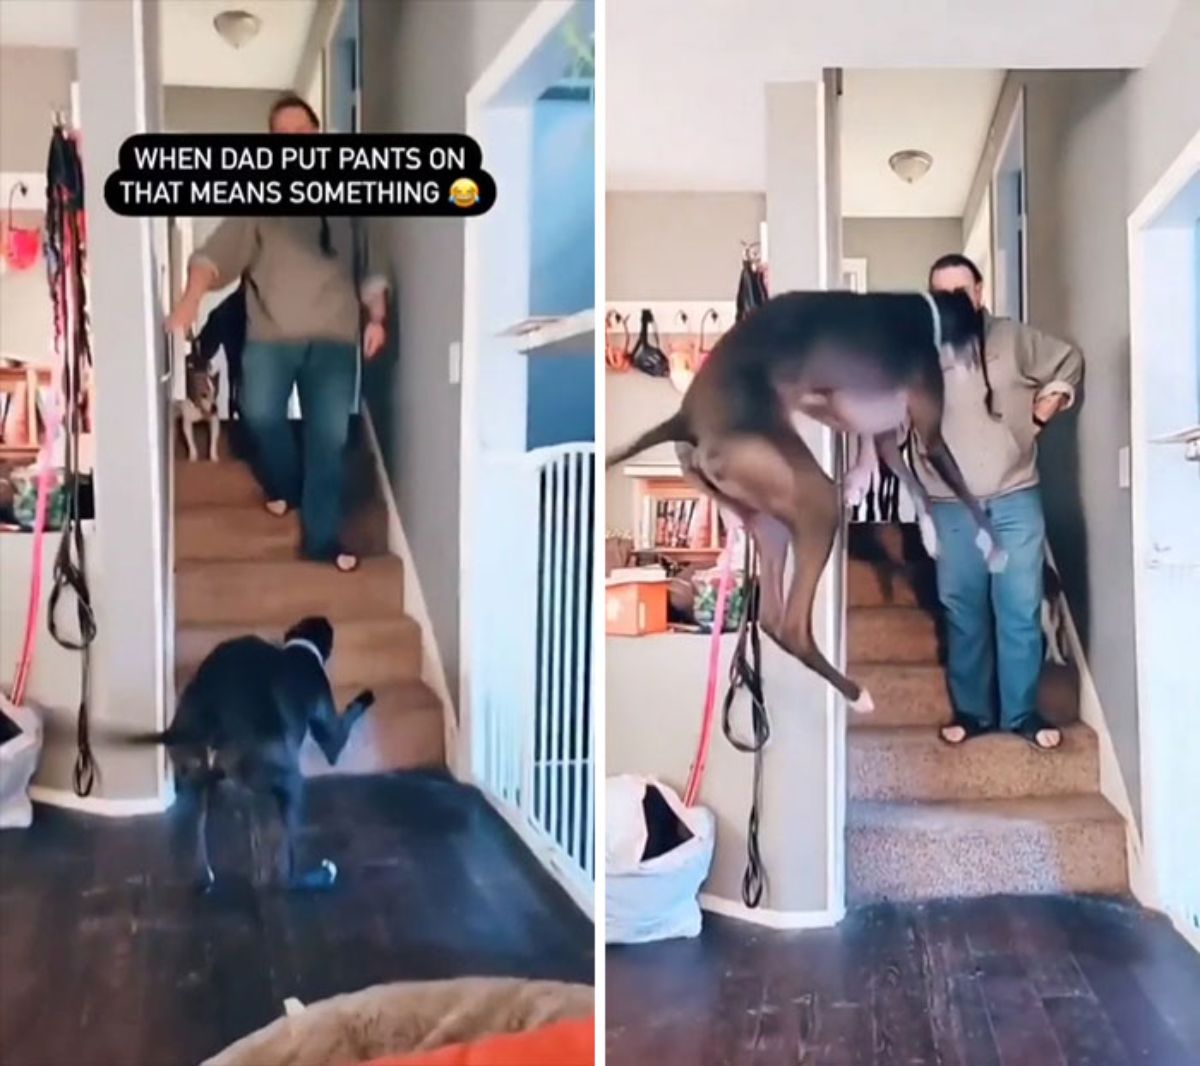 large brown and black dog at the bottom of stairs jumping up in front of a man and a brown and white dog coming down the stairs